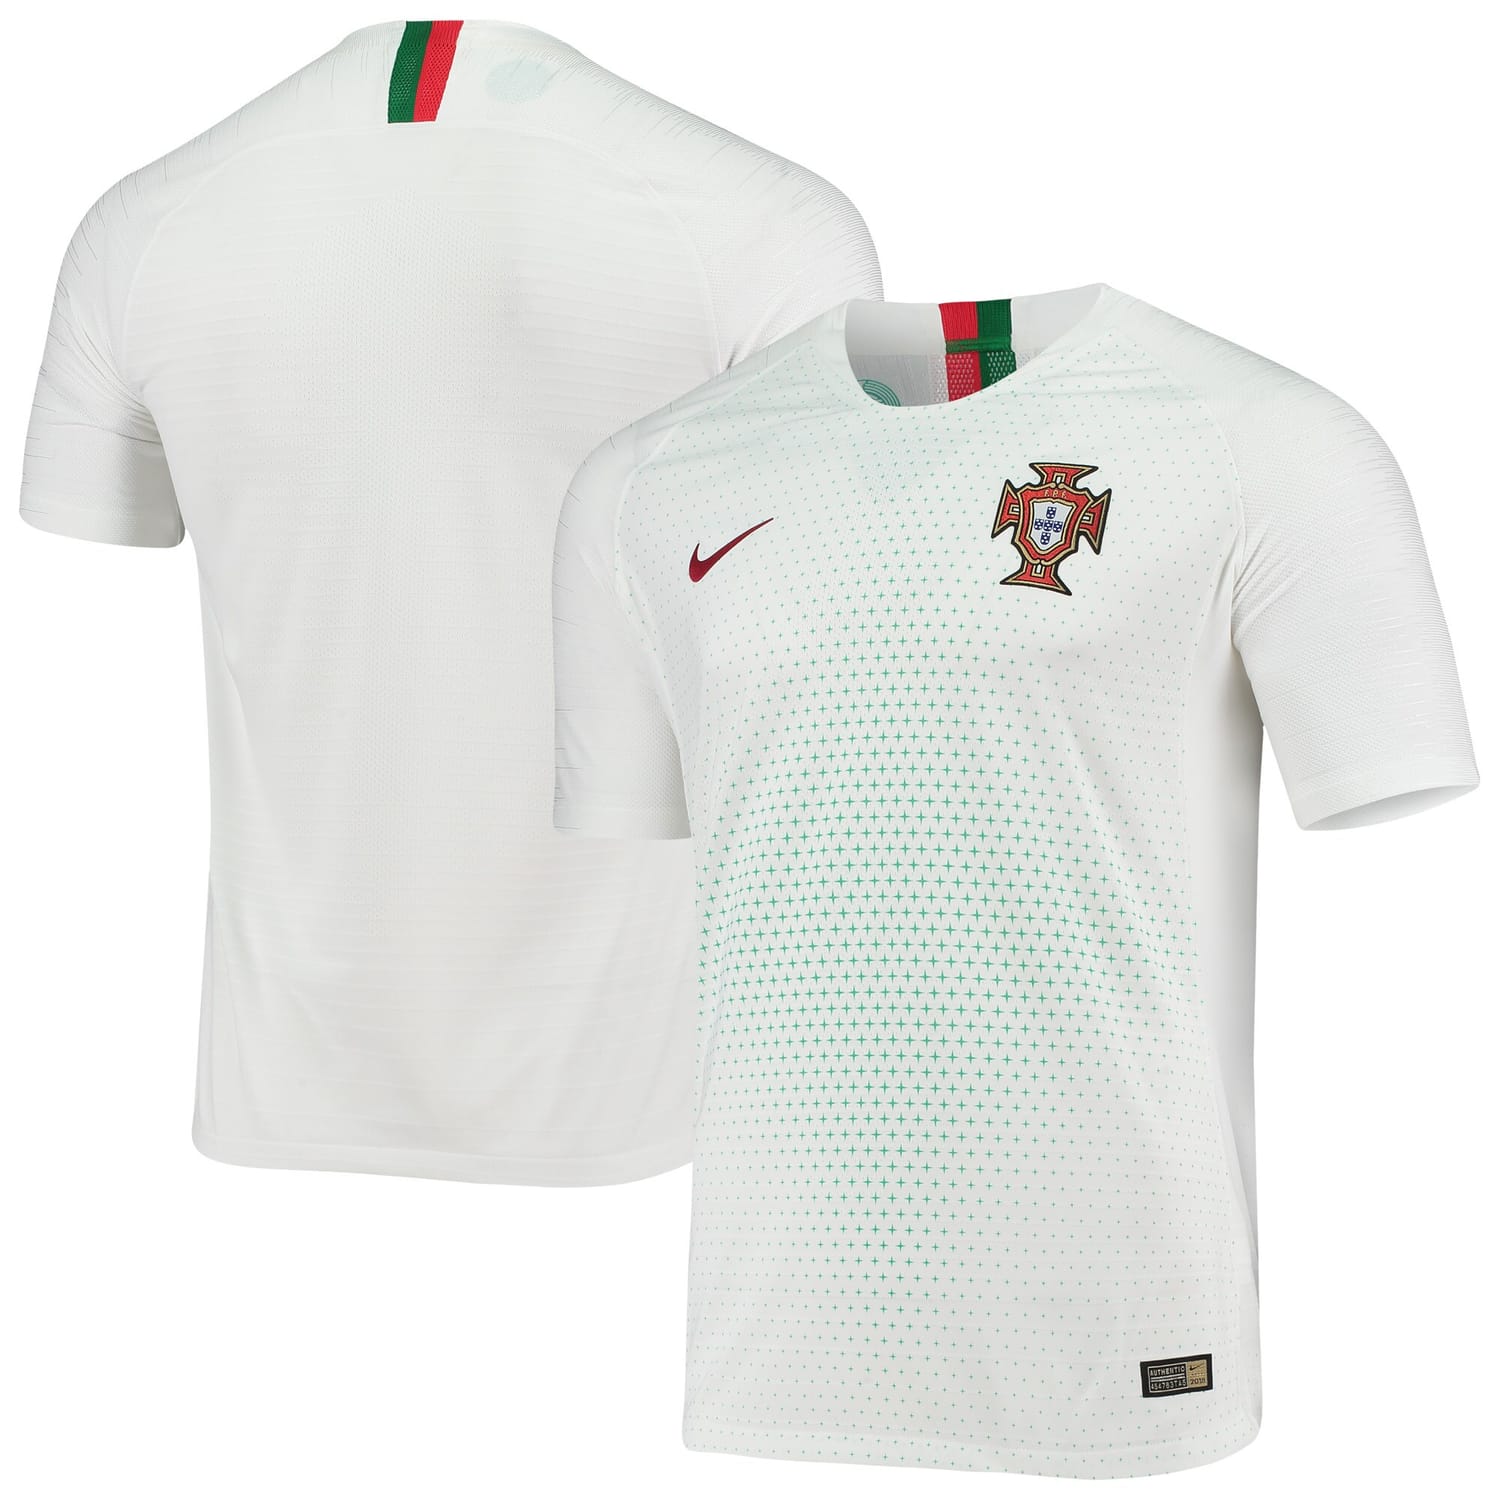 Portugal National Team Away Authentic Jersey Shirt White/Red for Men